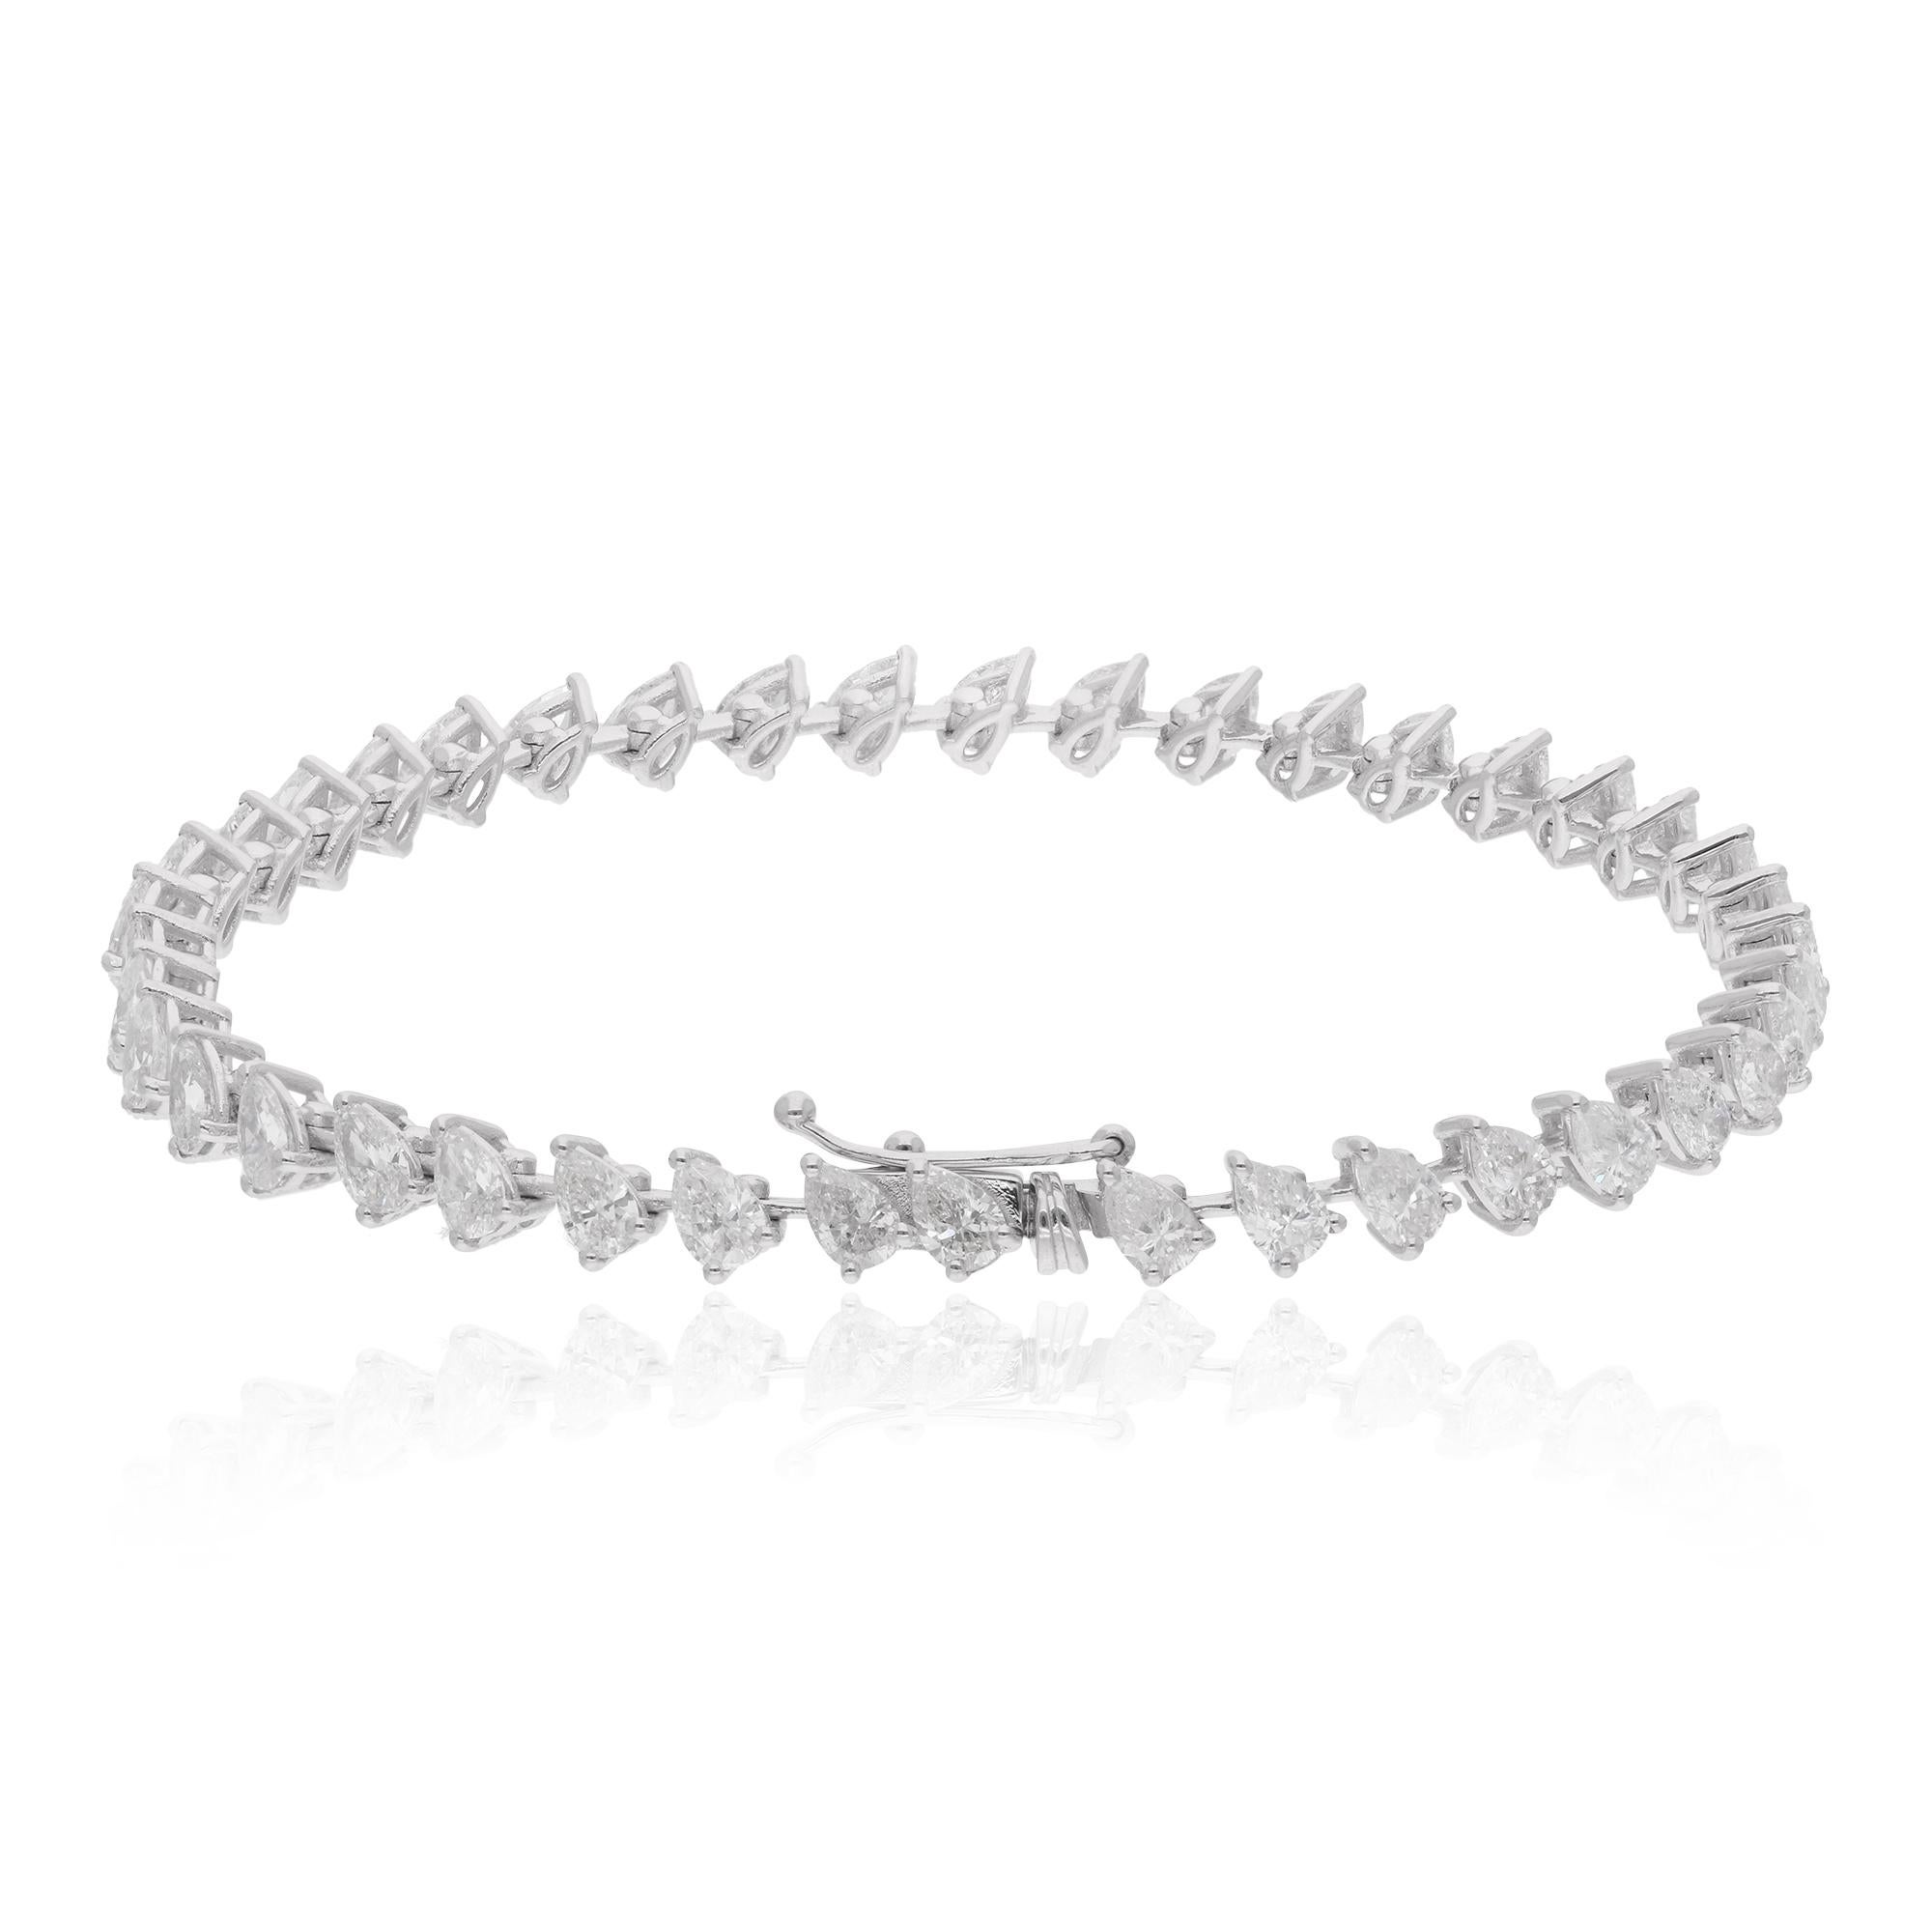 Item Code :- SEBR-43471
Gross Wt. :- 11.45 gm
18k Solid White Gold Wt. :- 10.18 gm
Natural Diamond Wt. :- 6.33 Ct. ( AVERAGE DIAMOND CLARITY SI1-SI2 & COLOR H-I )
Bracelet Length :- 7 Inches Long

✦ Sizing
.....................
We can adjust most